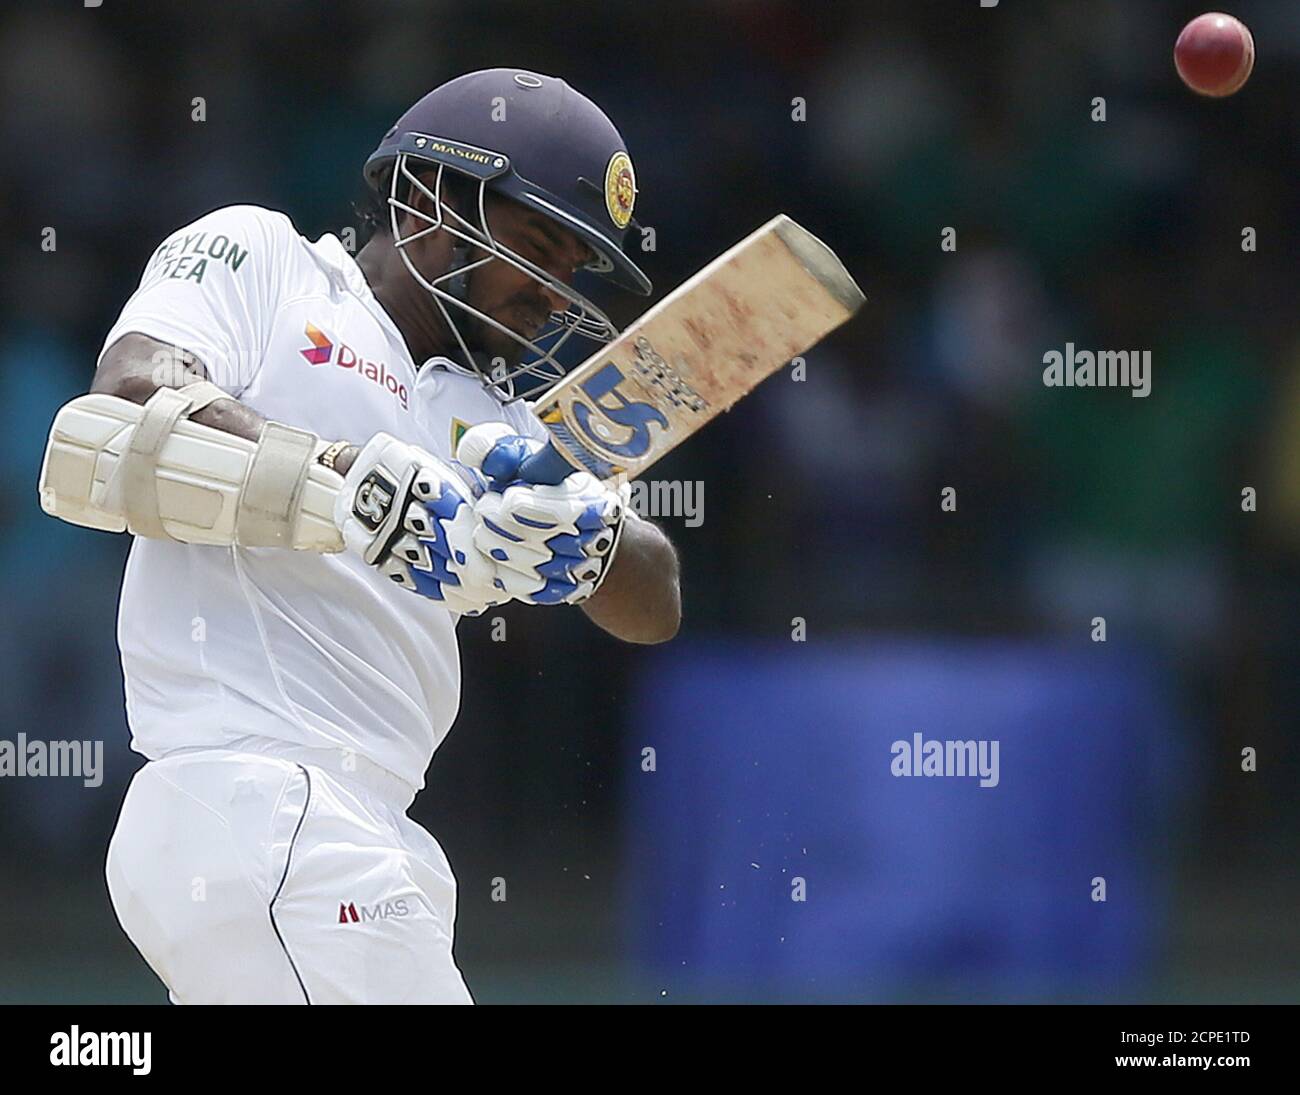 Sri Lanka's Kusal Perera hits a boundary during the third day of their third and final test cricket match against India in Colombo, August 30, 2015. REUTERS/Dinuka Liyanawatte Stock Photo